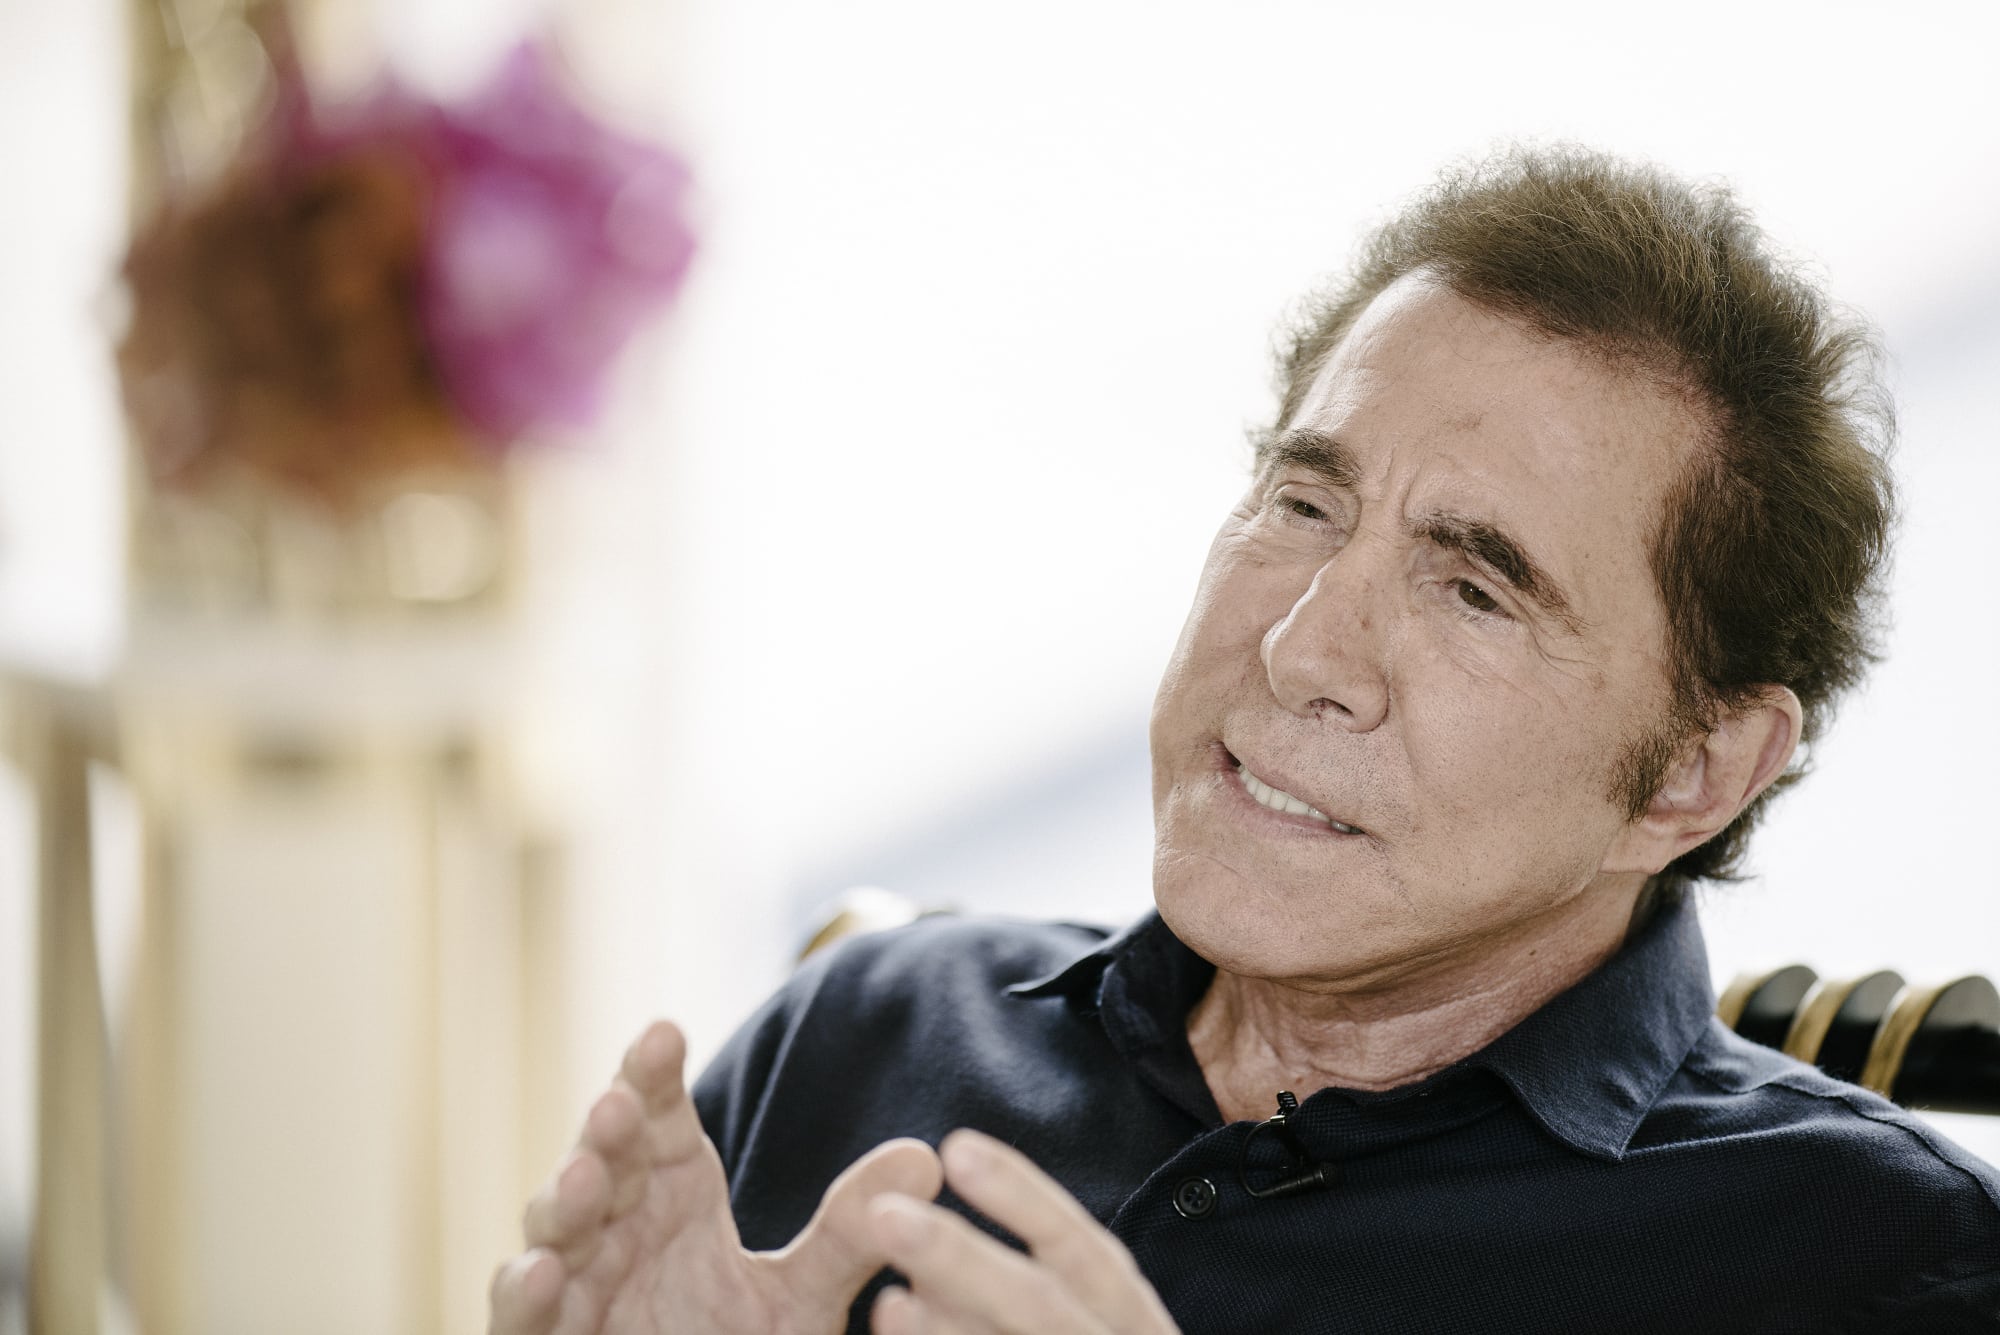 Casino mogul Steve Wynn has resigned as CEO of Wynn Resorts following multiple accusations of sexual harassment.